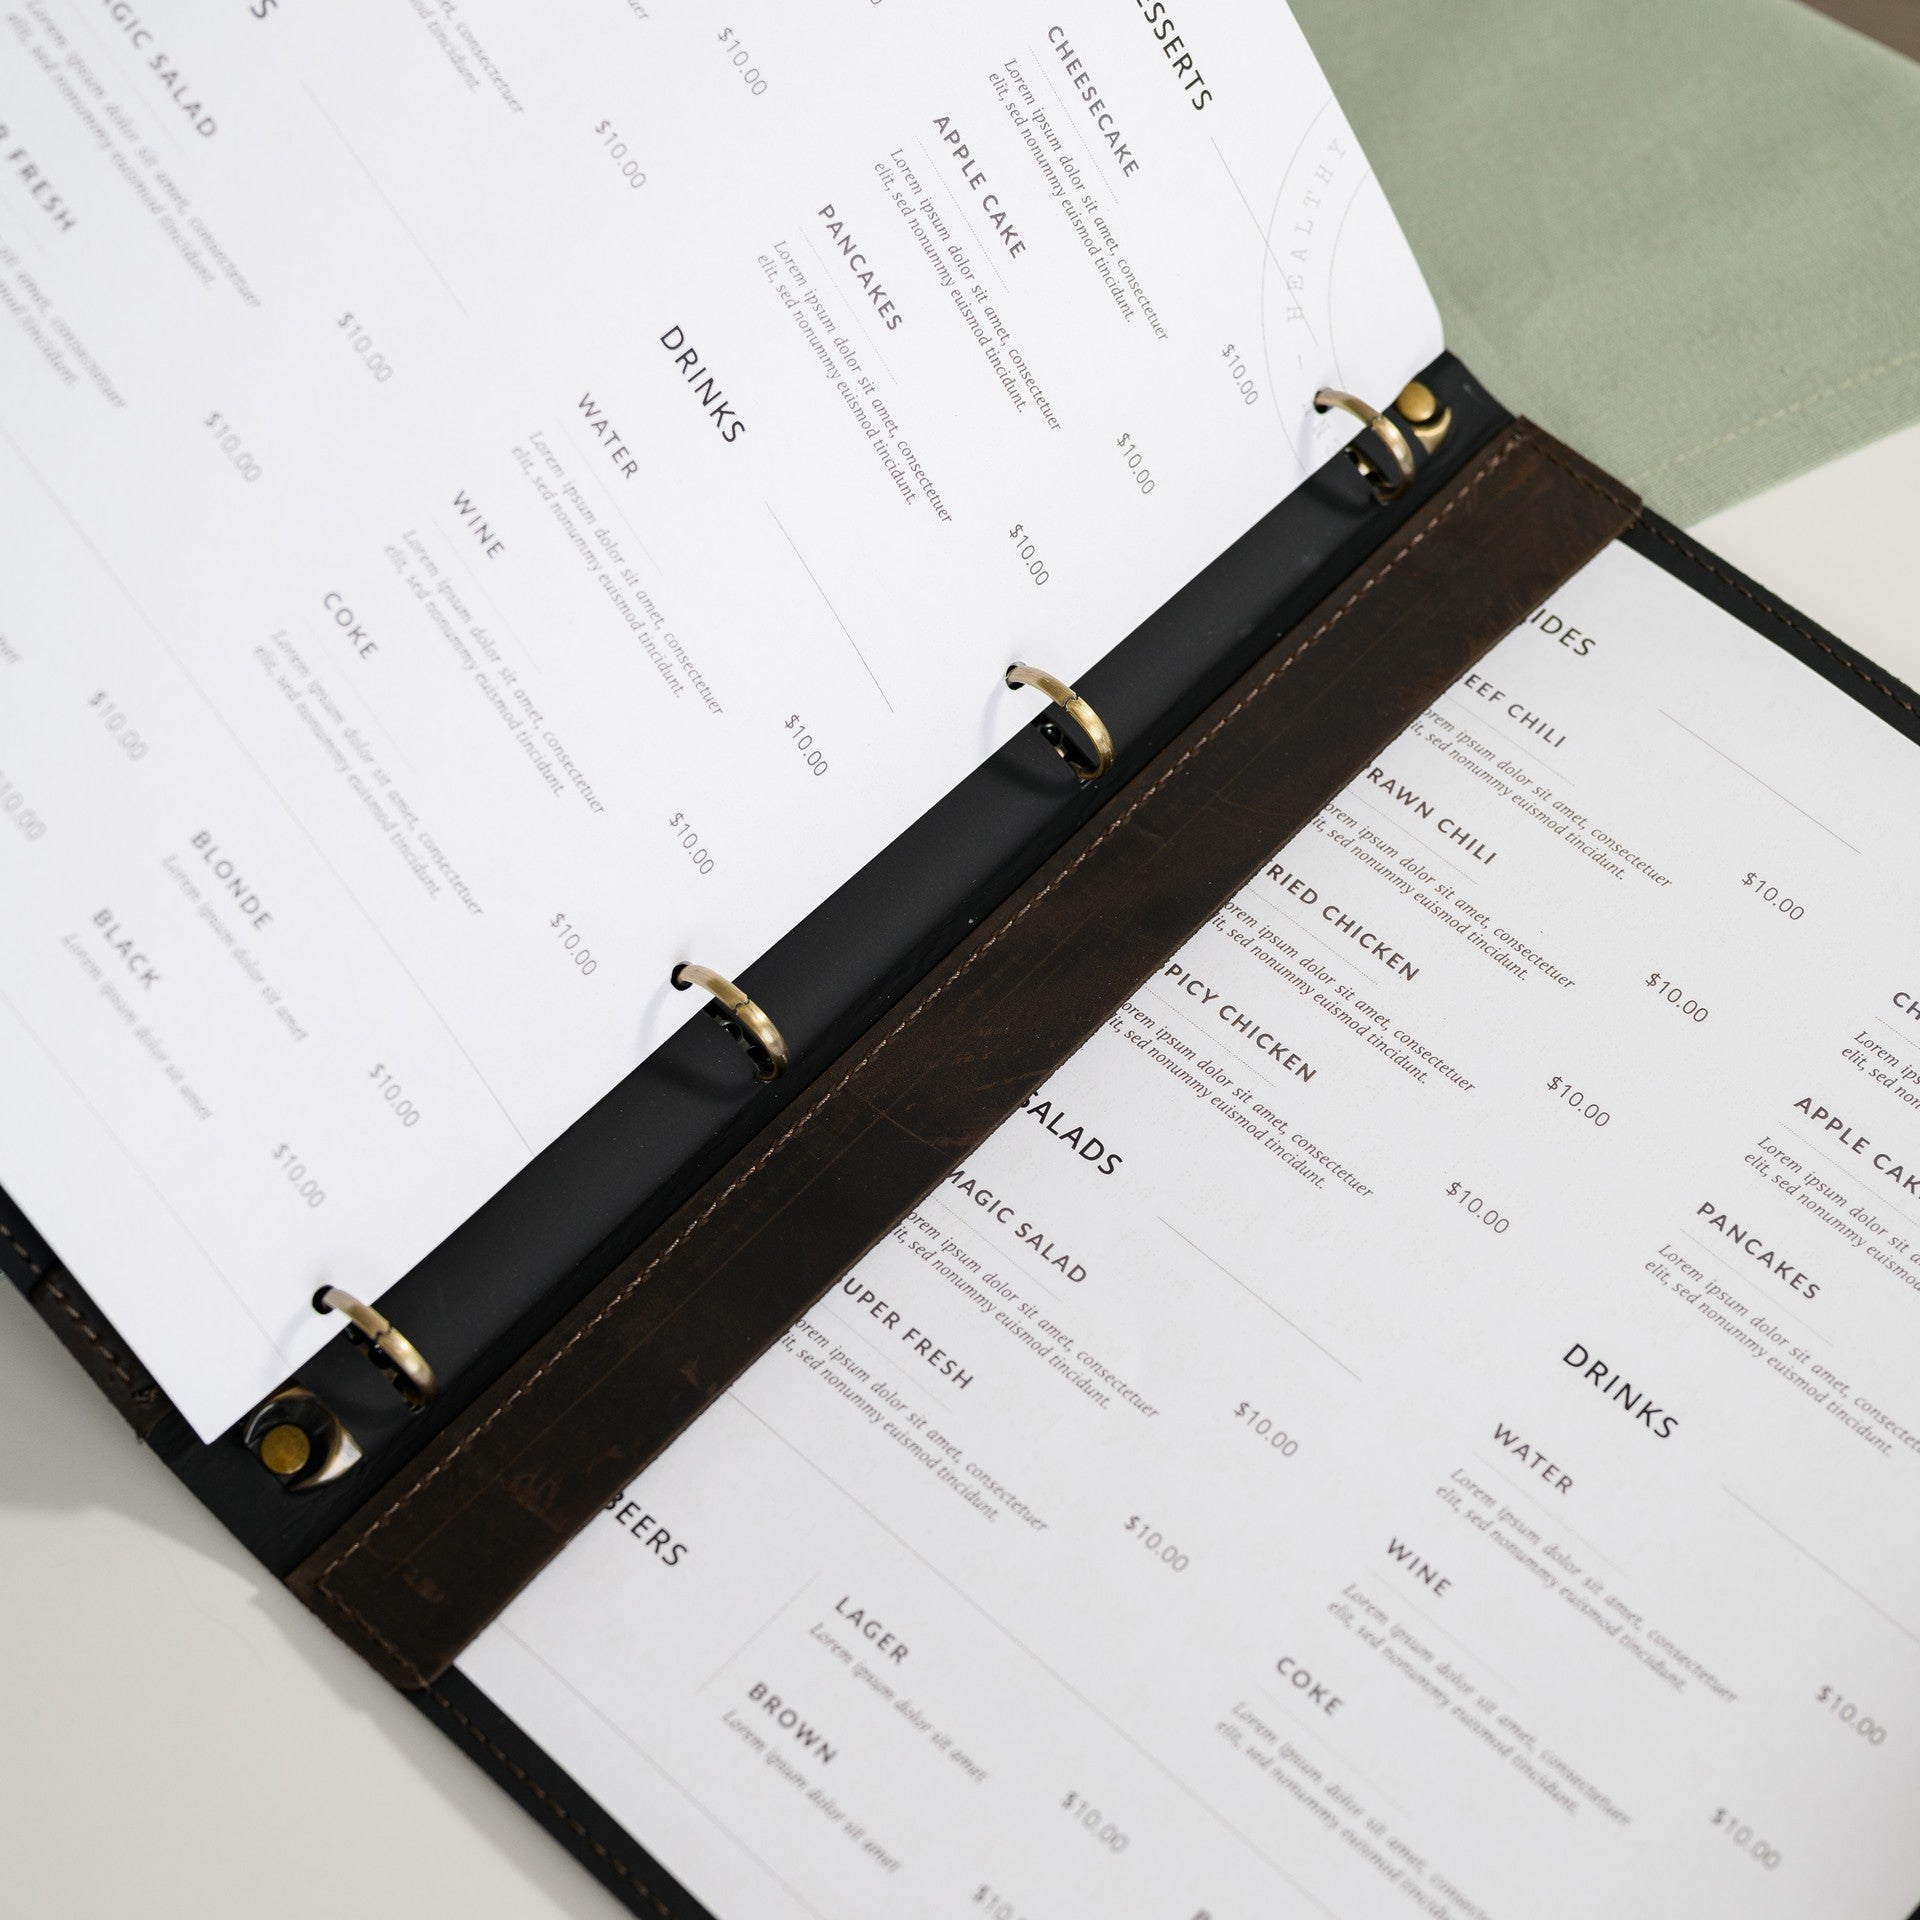 Leather Menu Covers with sheets attached by Metal Binder